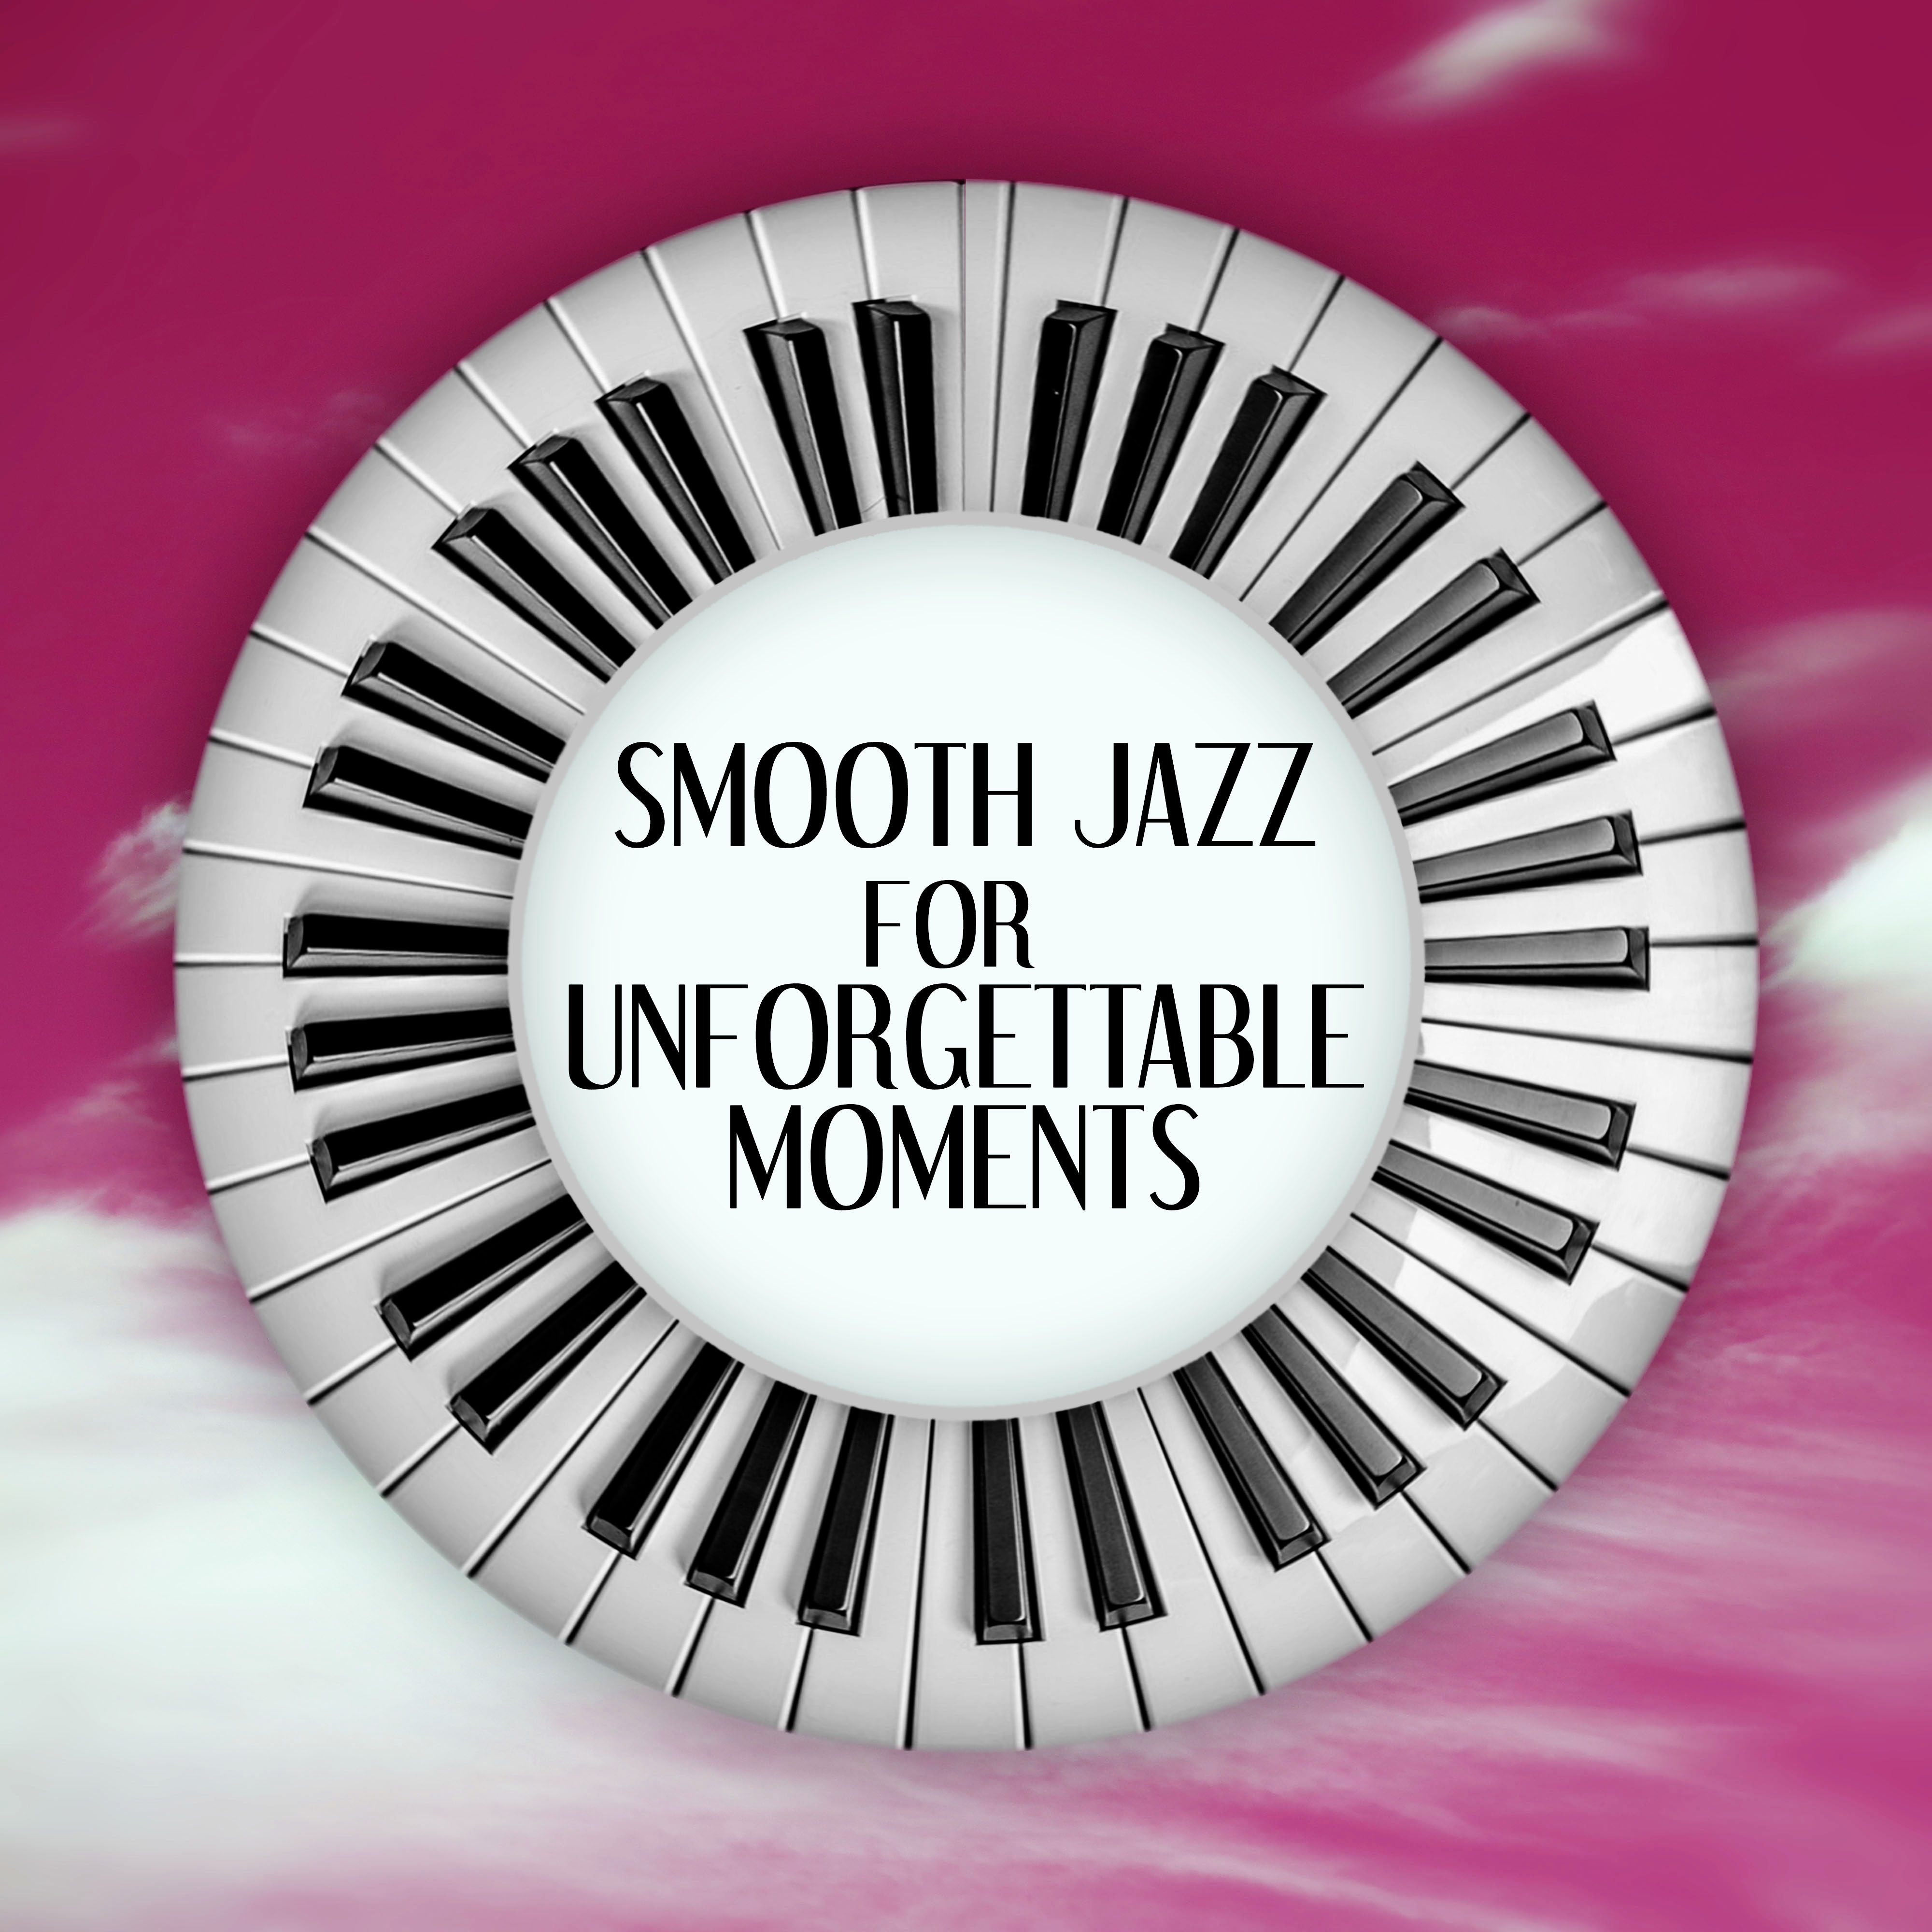 Smooth Jazz for Unforgettable Moments  Soft Piano Jazz, Quiet Night, Calming Background Sounds, Mellow Jazz, Slow and Sensual Piano Music